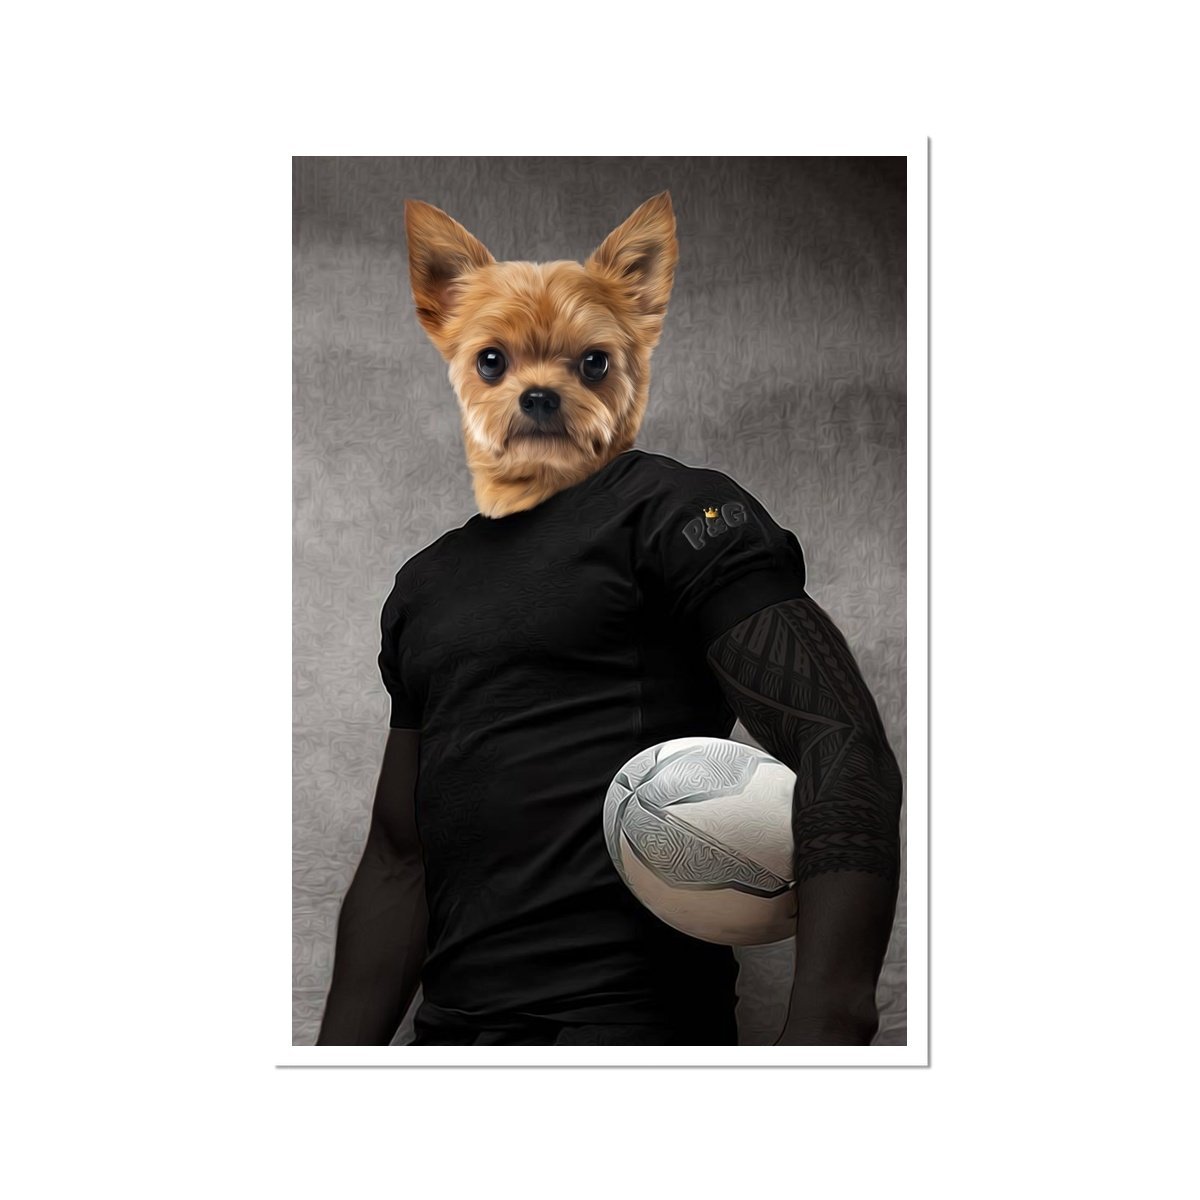 The Rugby Player: Custom Pet Poster - Paw & Glory - #pet portraits# - #dog portraits# - #pet portraits uk#Paw & Glory, pawandglory, pet portraits black and white, dog astronaut photo, nasa dog portrait, for pet portraits, aristocratic dog portraits, pictures for pets, pet portraits